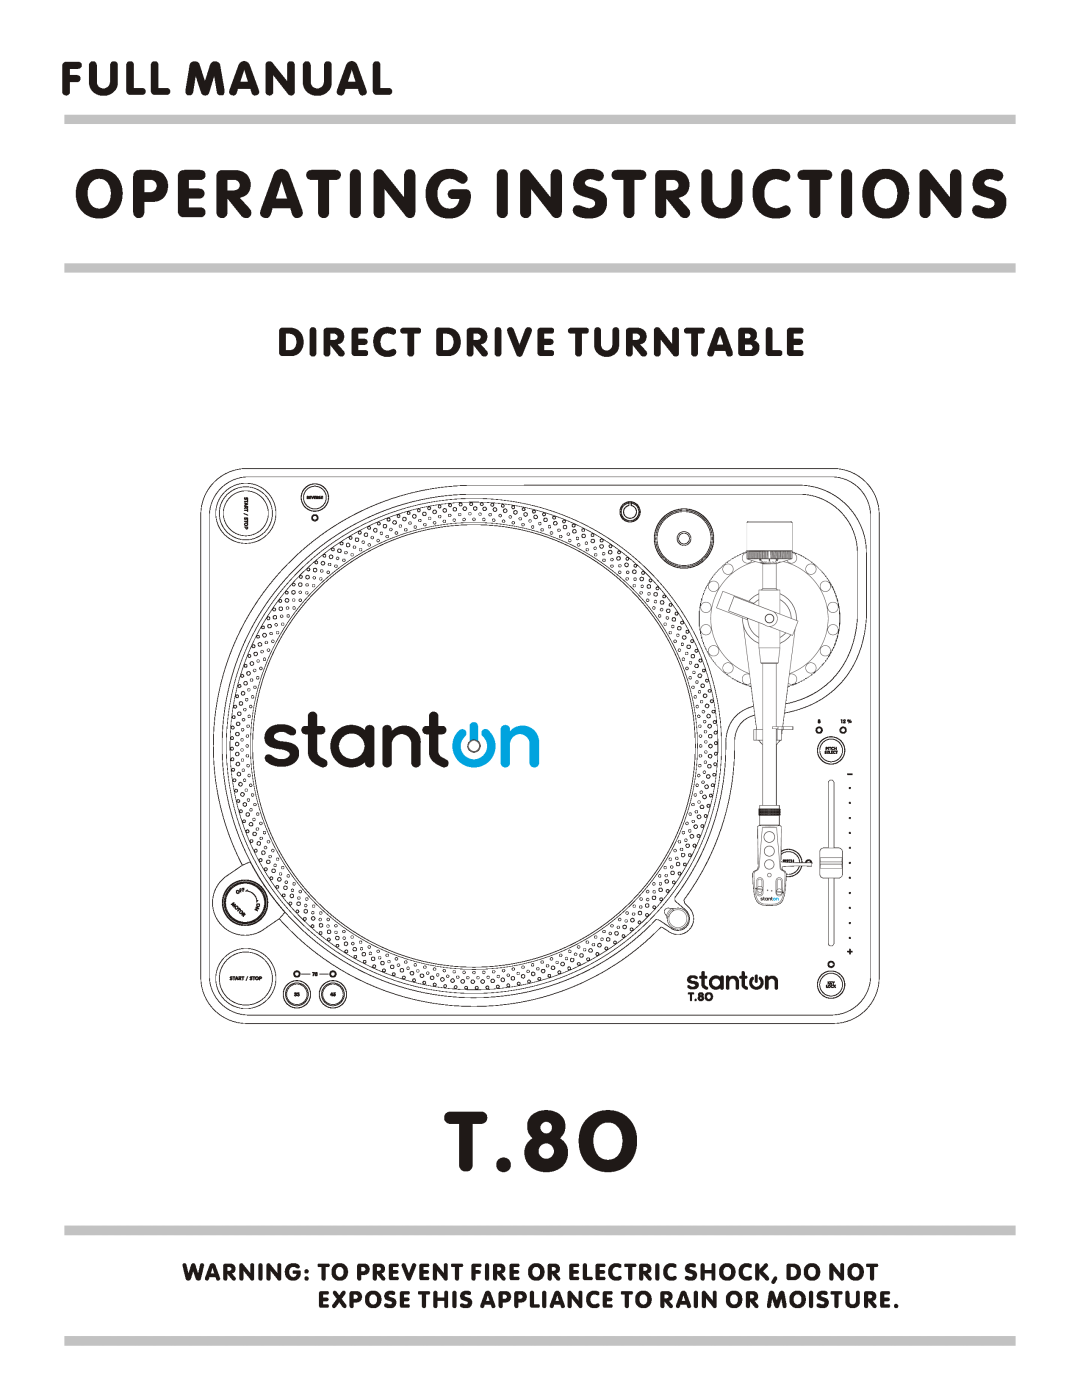 Stanton T.8O manual Operating Instructions, Full Manual, Direct Drive Turntable 